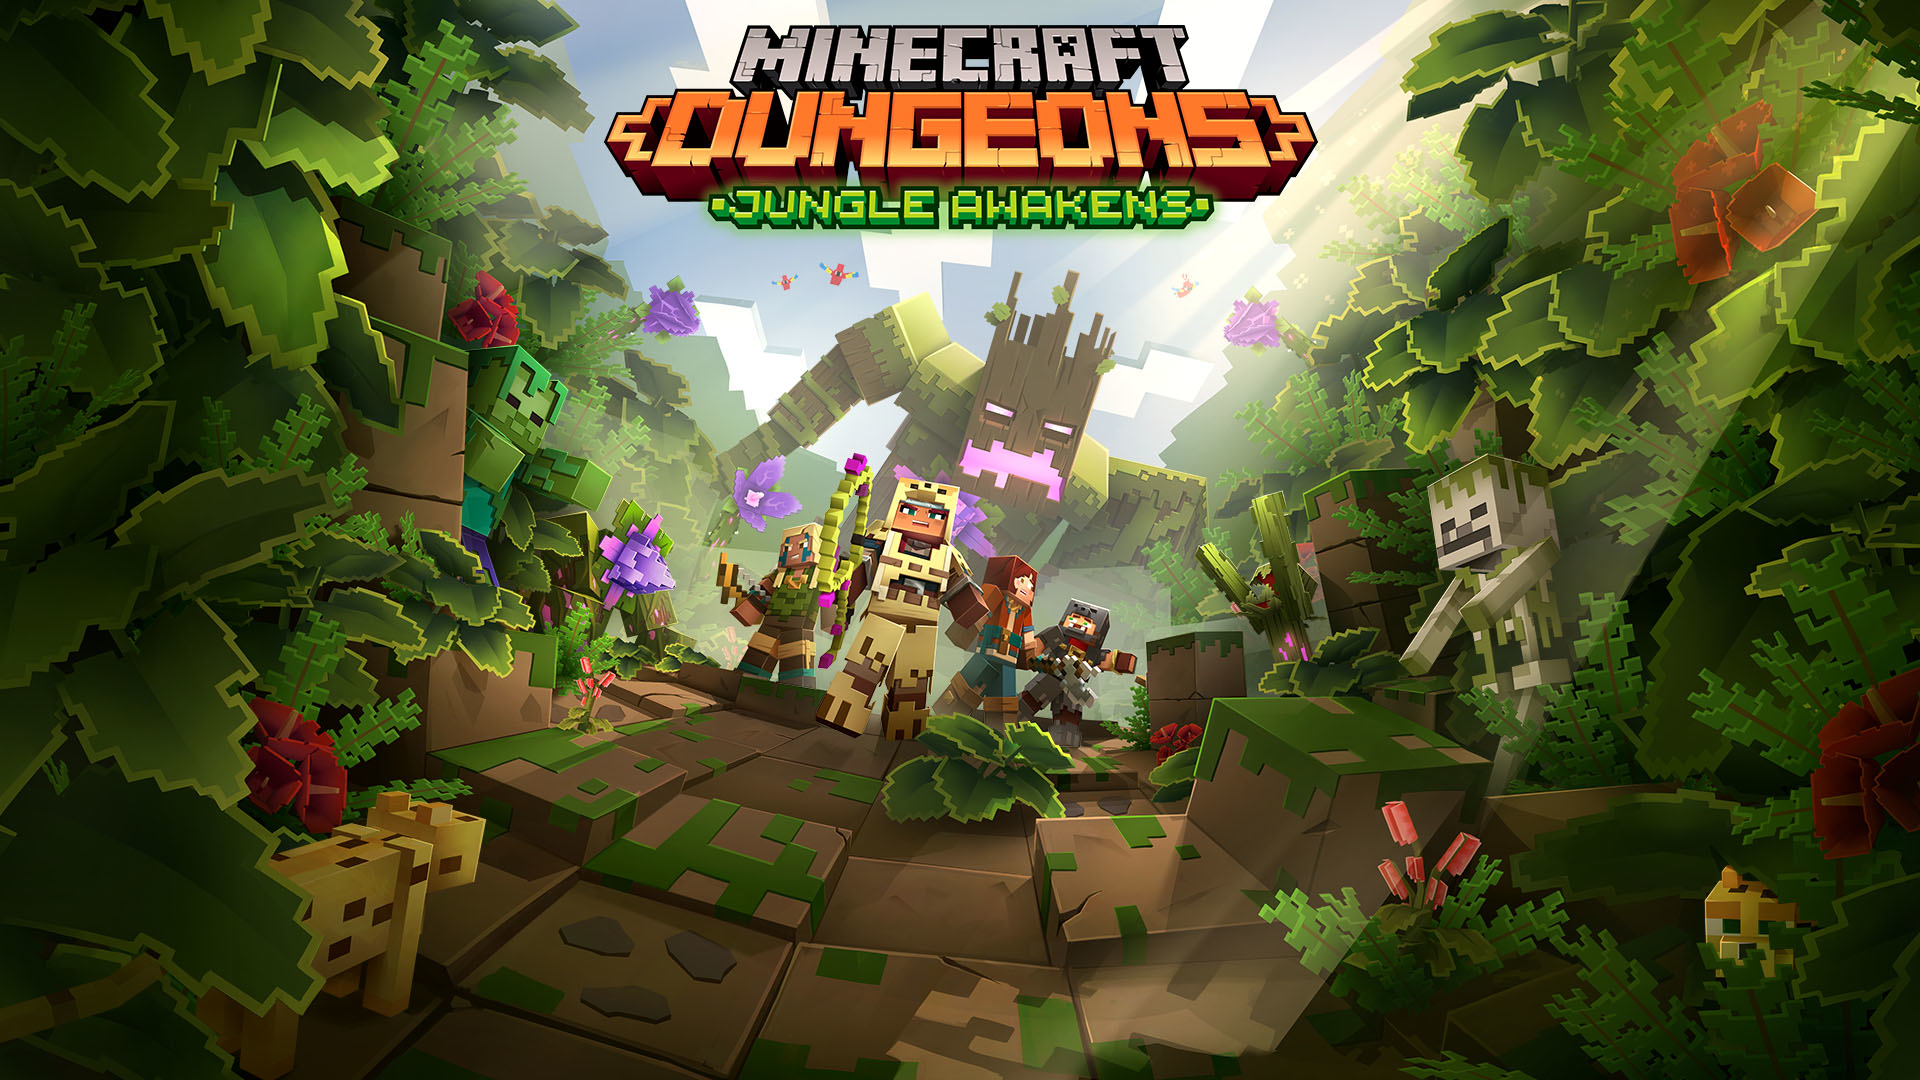 Minecraft Dungeons Jungle Awakens Wallpaper Hd Games 4k Wallpapers Images Photos And Background Wallpapers Den